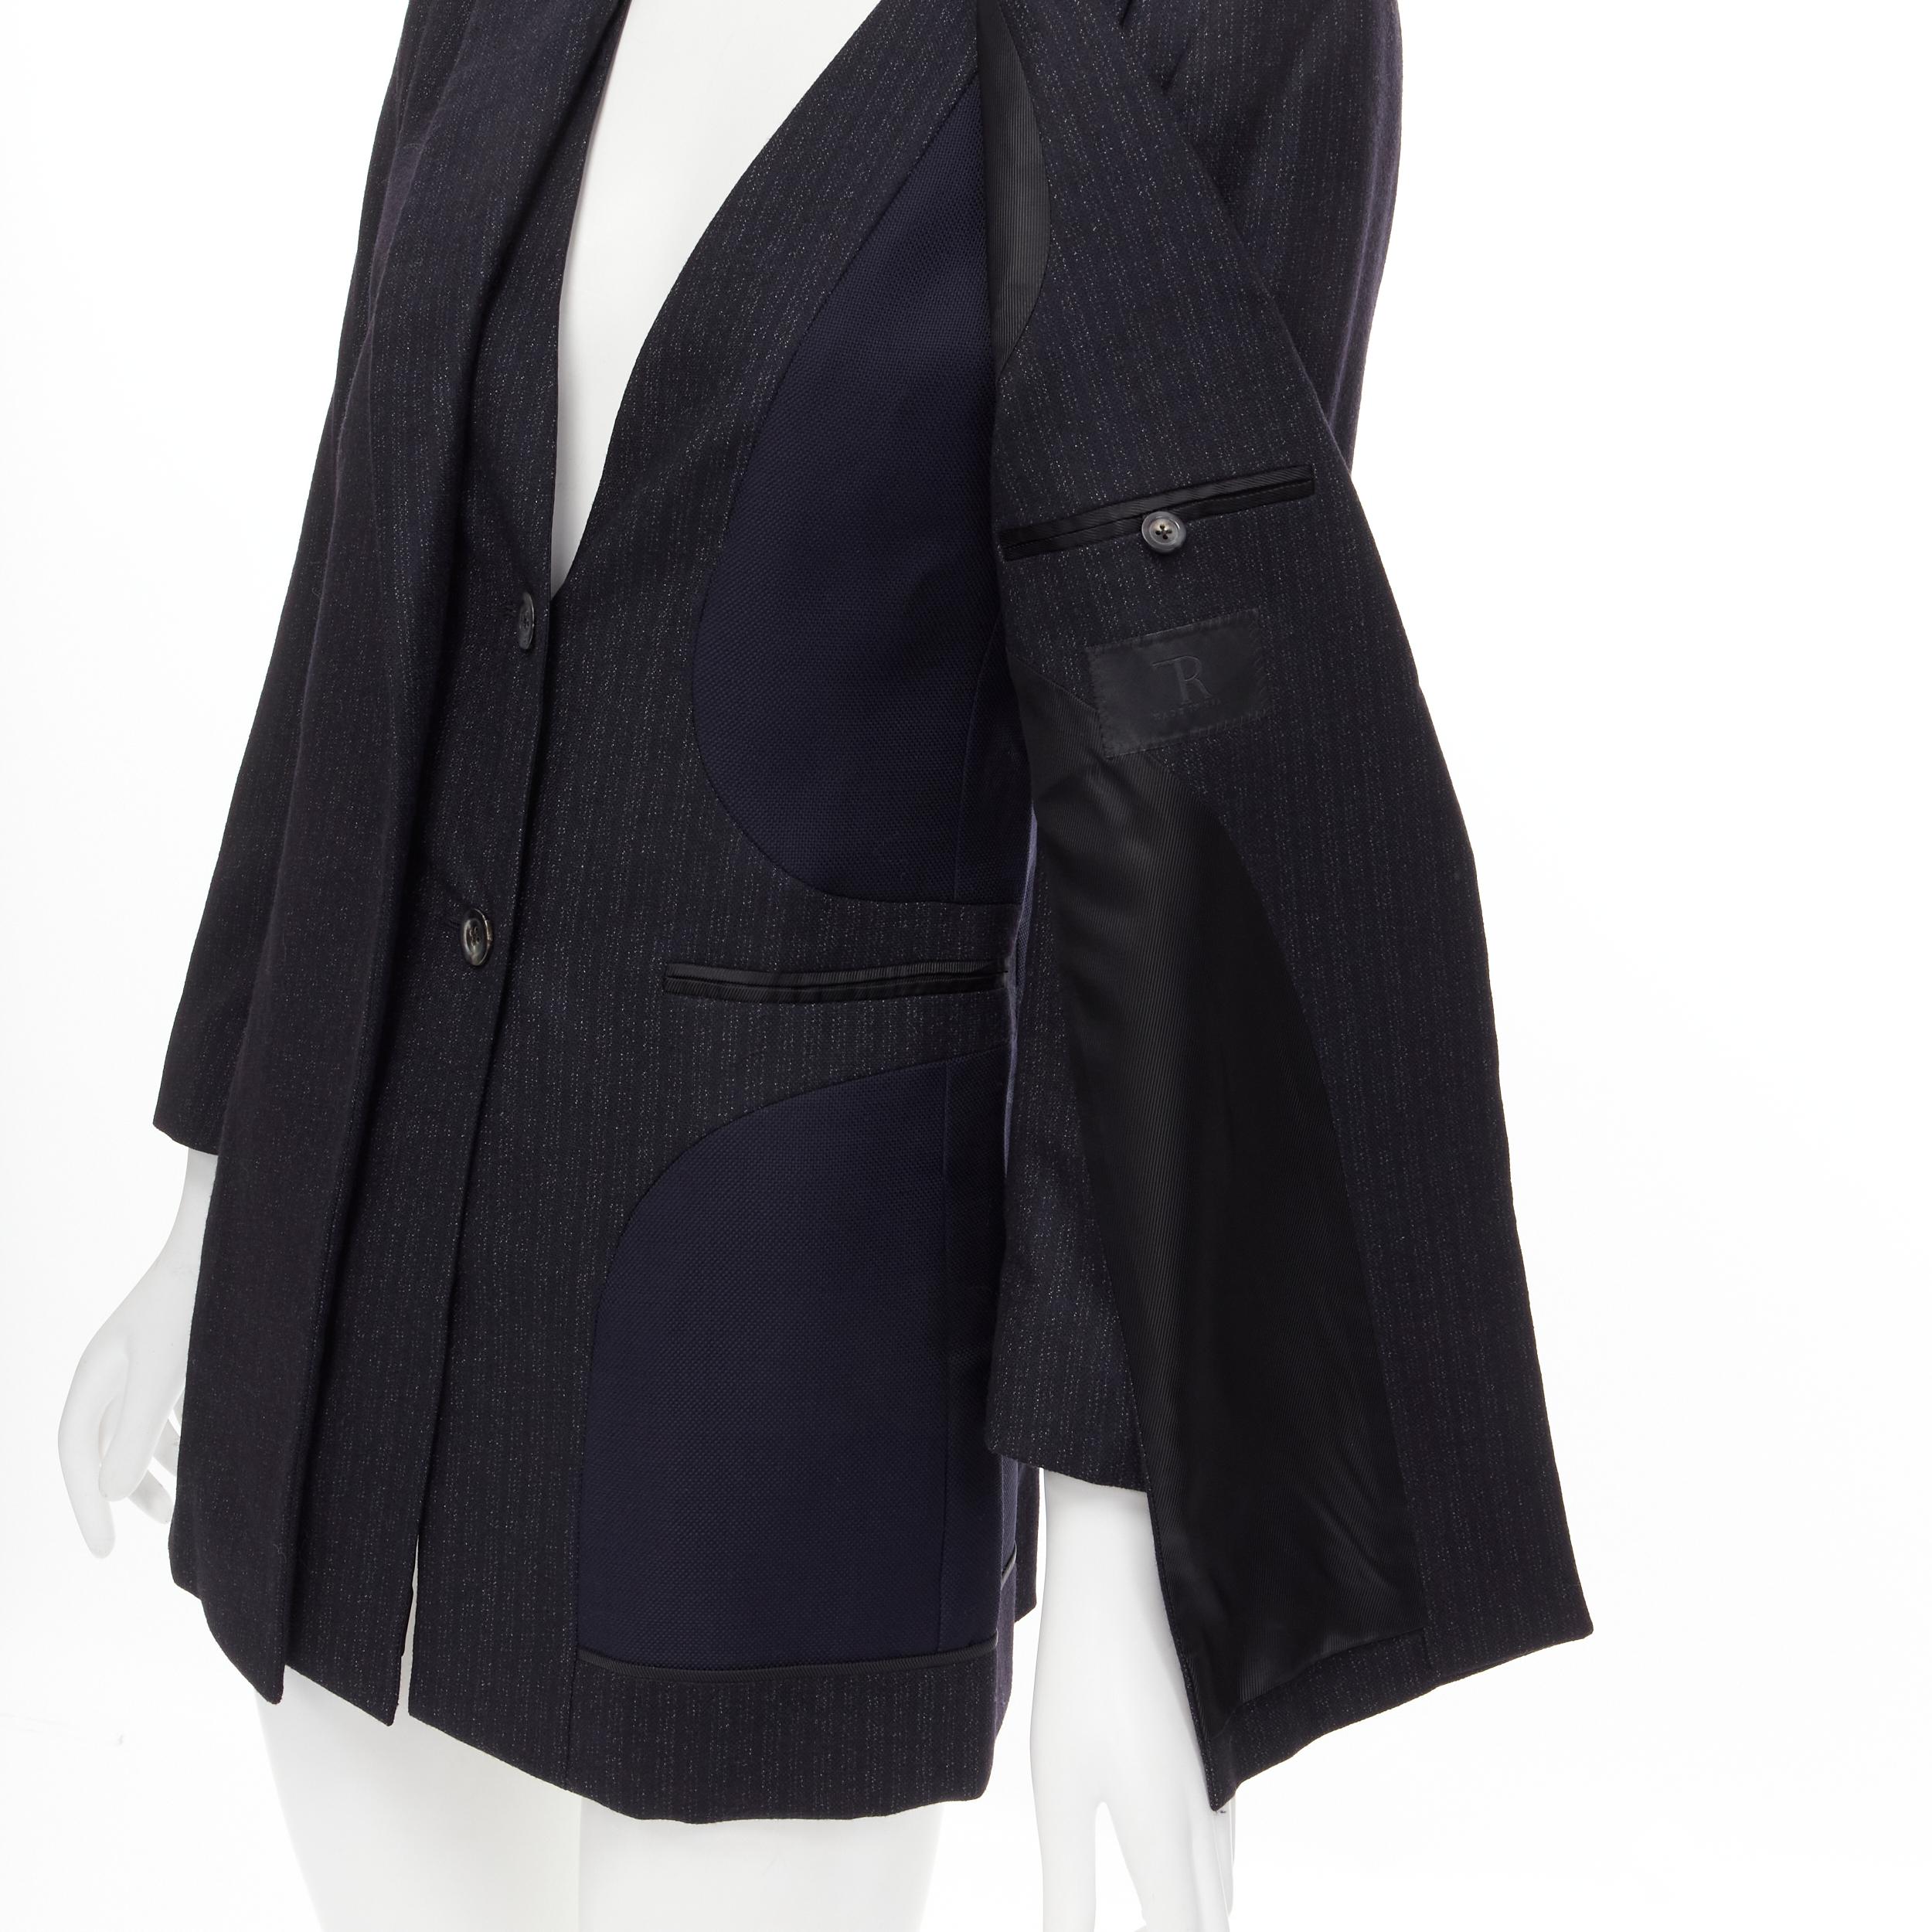 new THE ROW Neril dark navy pinstriped layered flap front blazer jacket US2 
Reference: MELK/A00013 
Brand: The Row 
Material: Wool 
Color: Grey 
Pattern: Pinstripe 
Closure: Button 
Extra Detail: Layered front design. Exposed lining design. Long